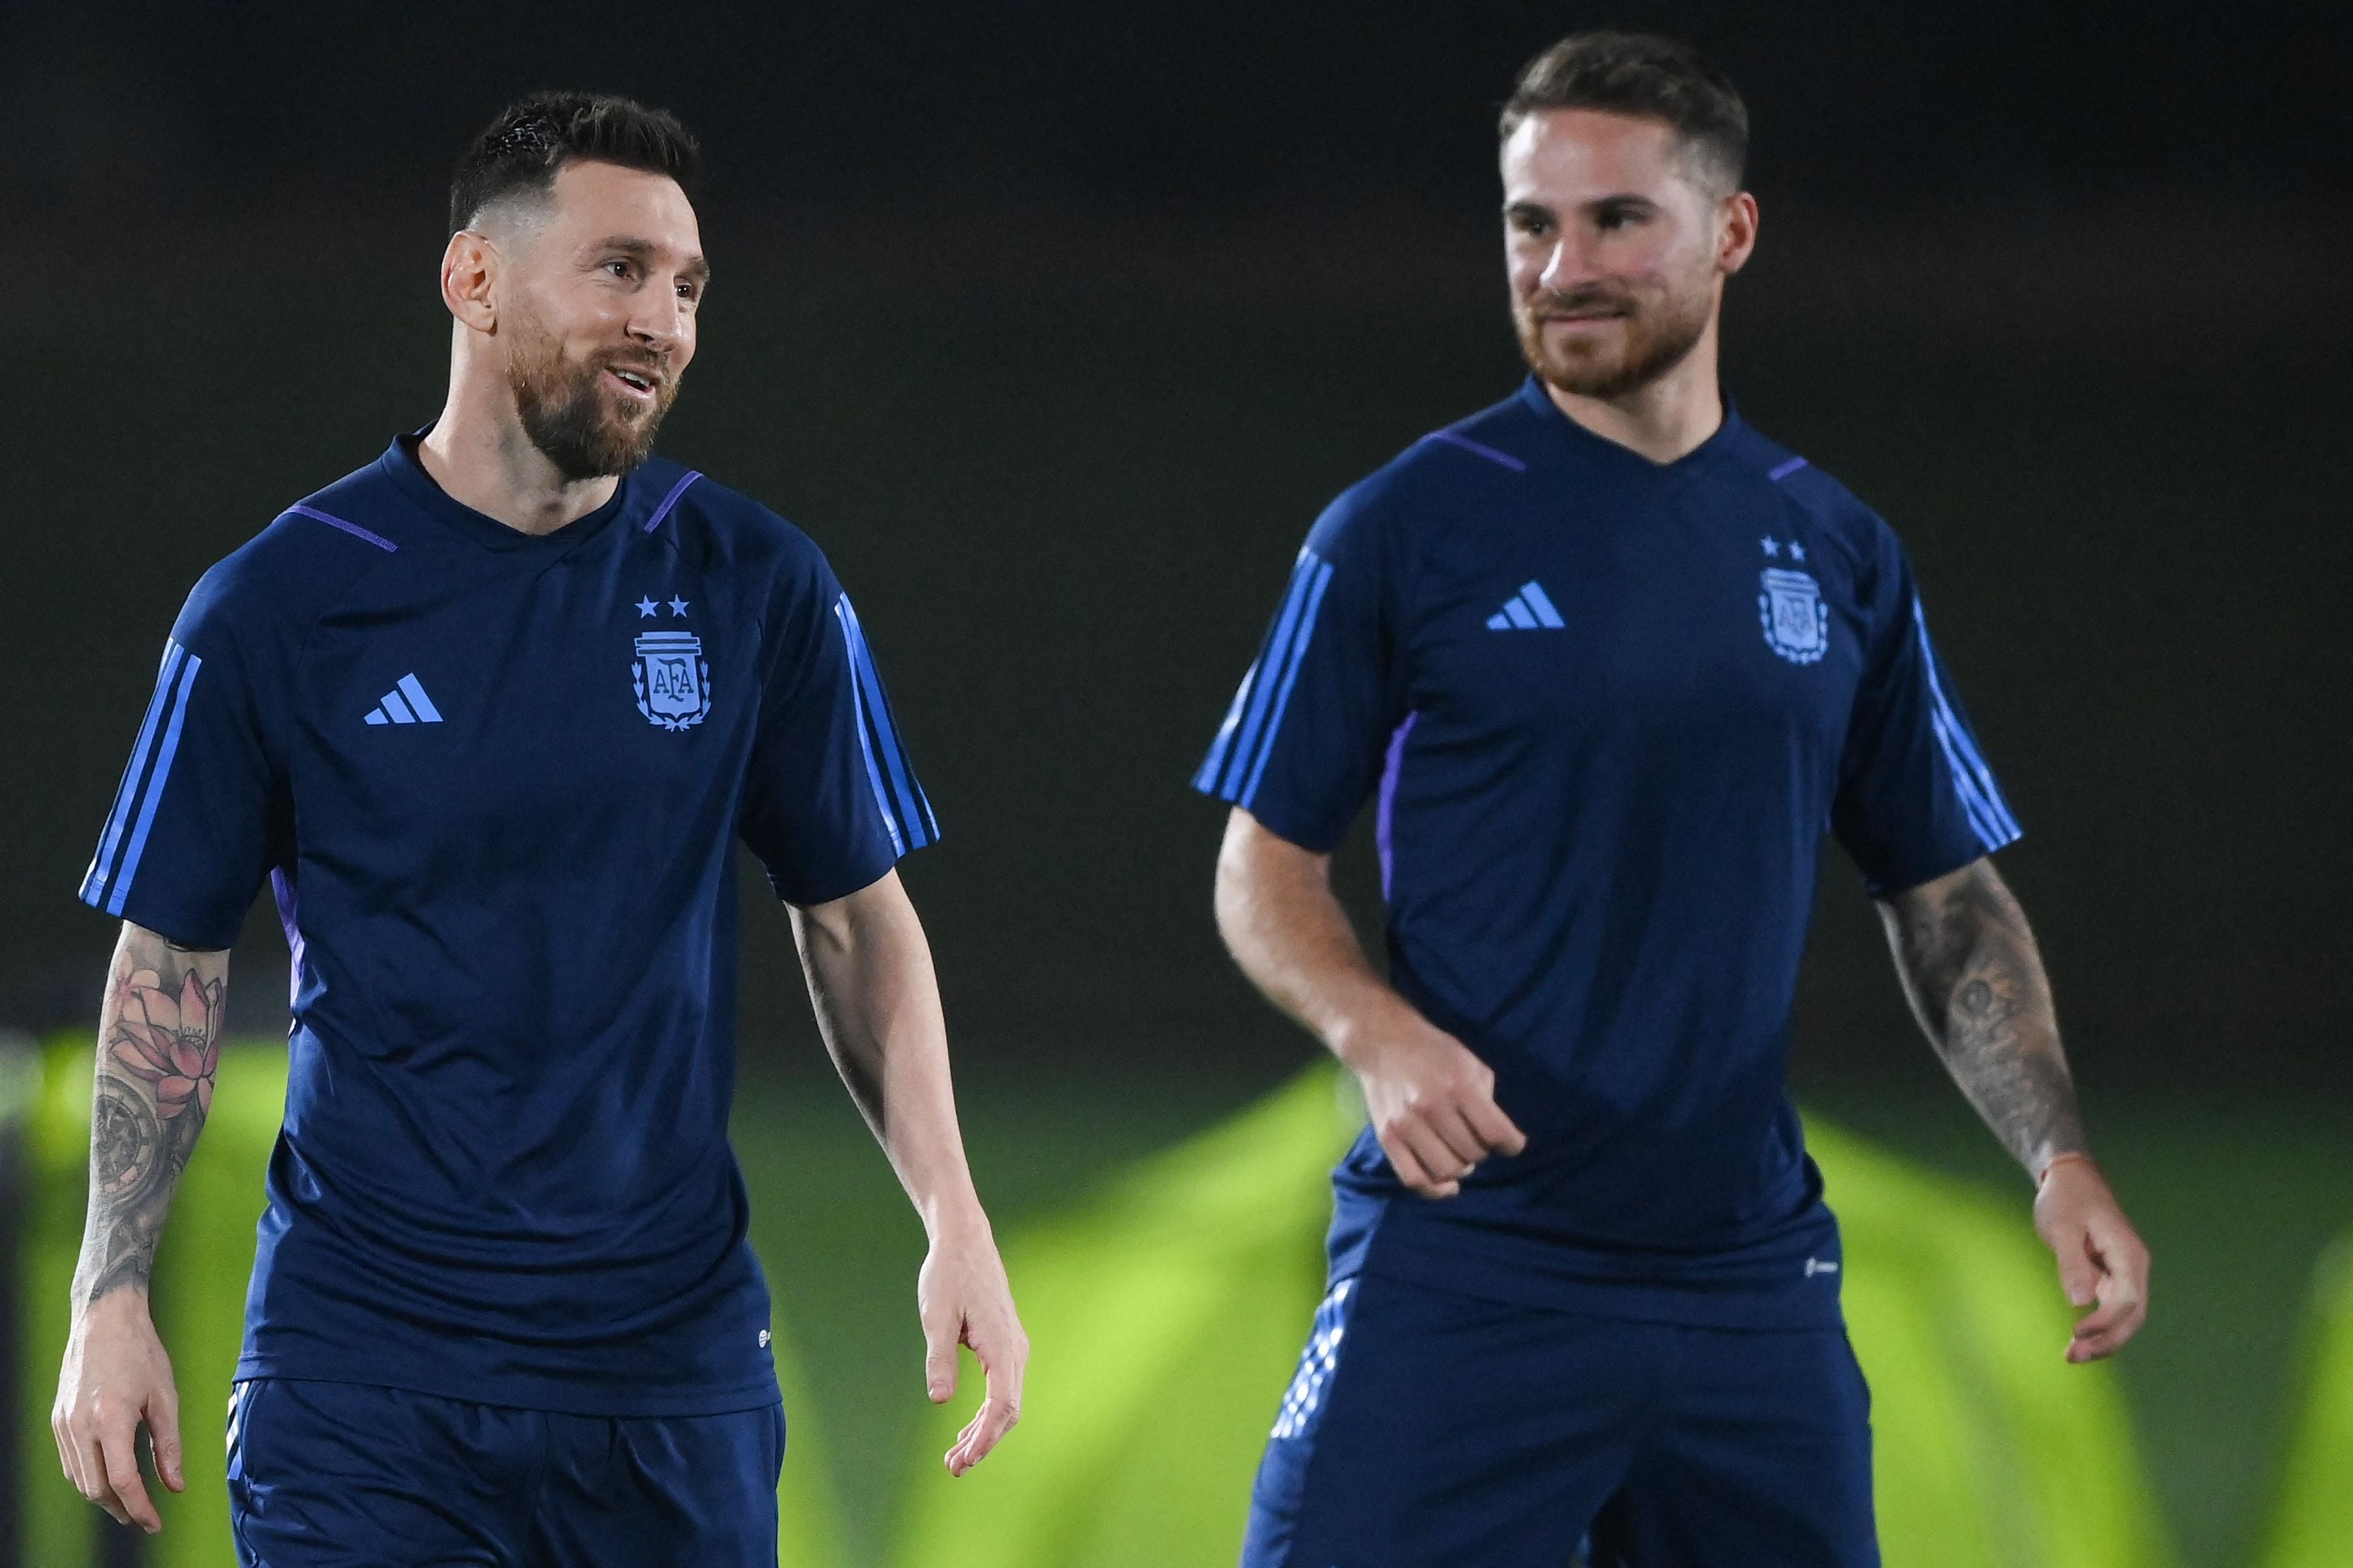 Argentina's forward #10 Lionel Messi (L) and Argentina's midfielder #20 Alexis Mac Allister take part in a training session at Qatar University training site 3 in Doha on December 17, 2022, on the eve of the Qatar 2022 World Cup football final match between Argentina and France. (Photo by FRANCK FIFE / AFP)